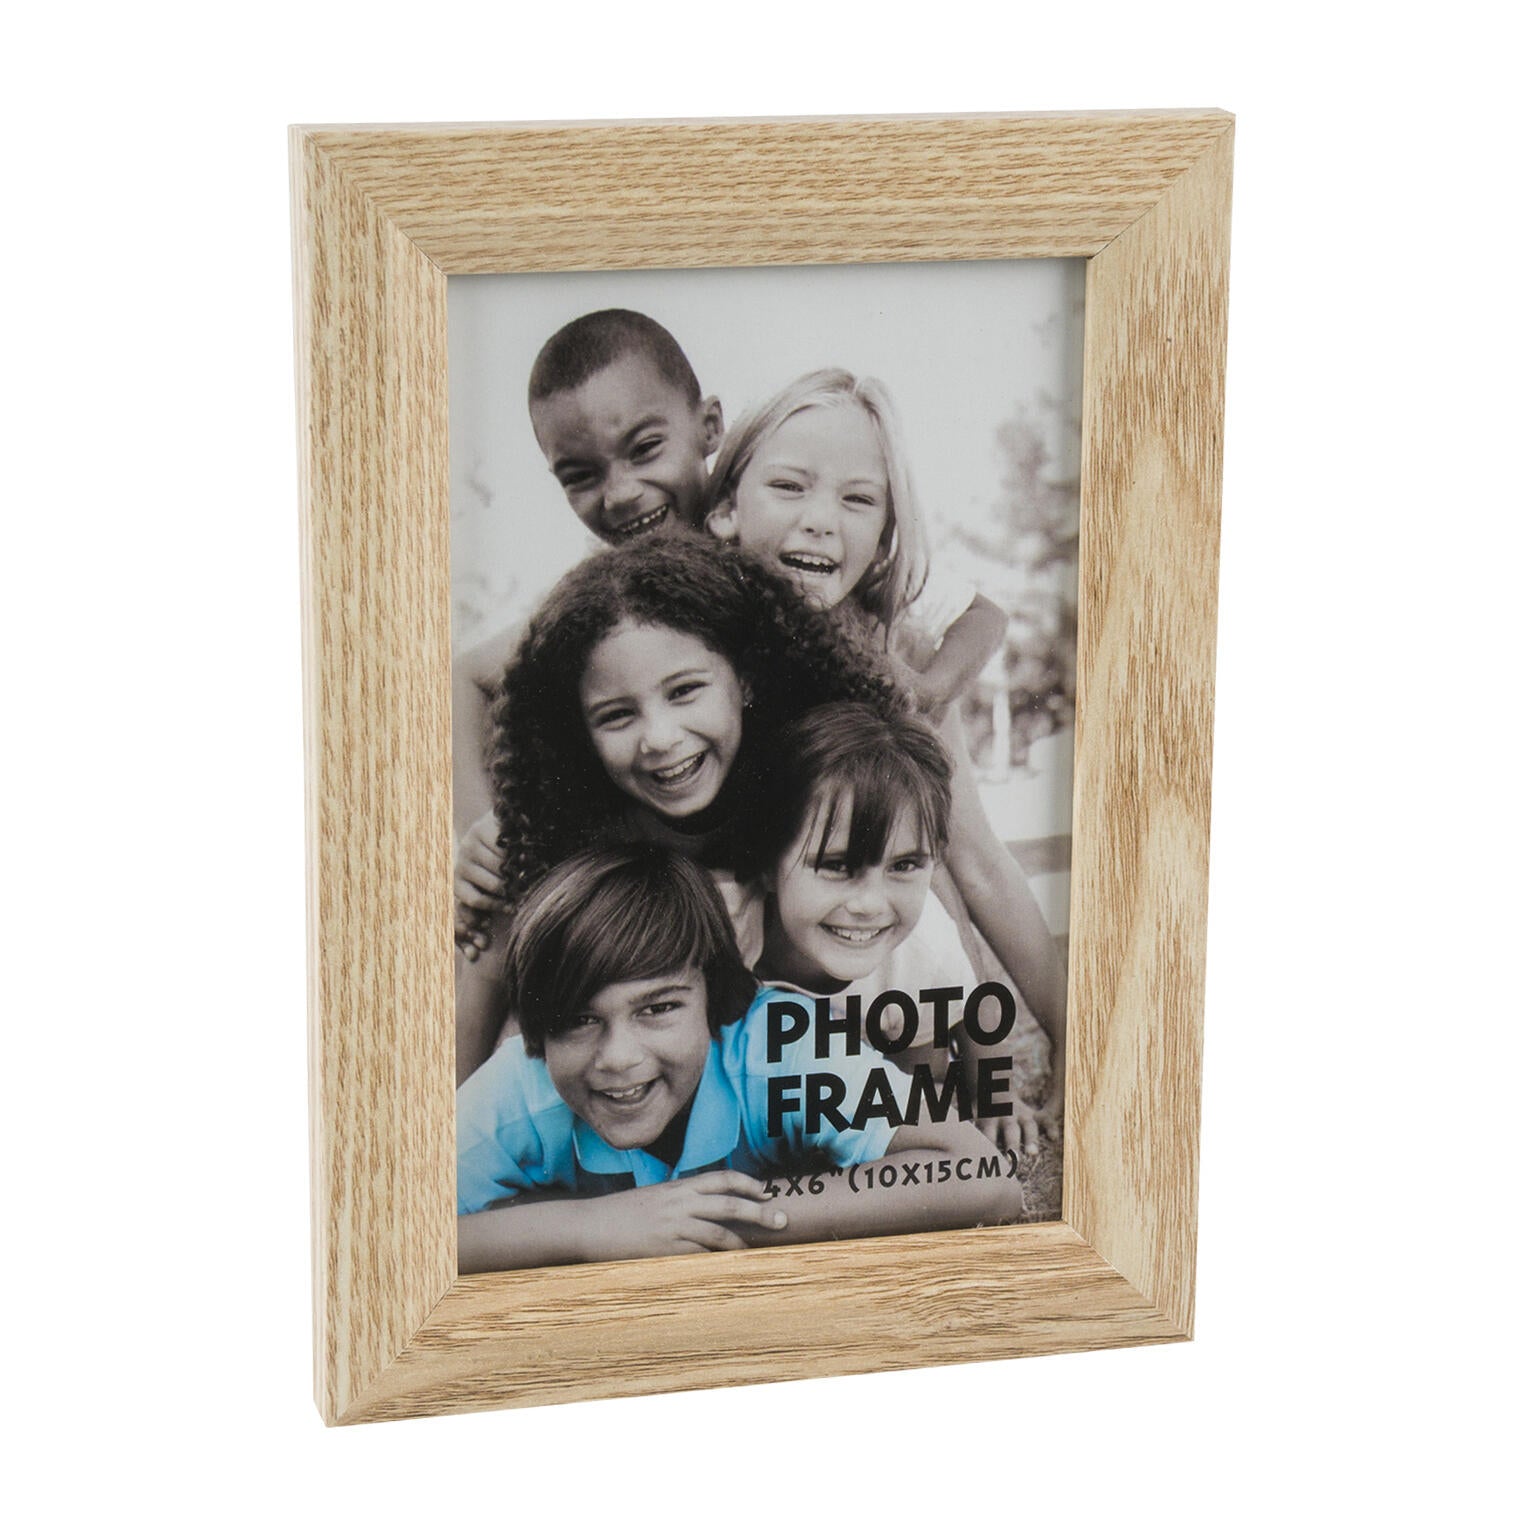 Wooden Picture Frame 6x8"